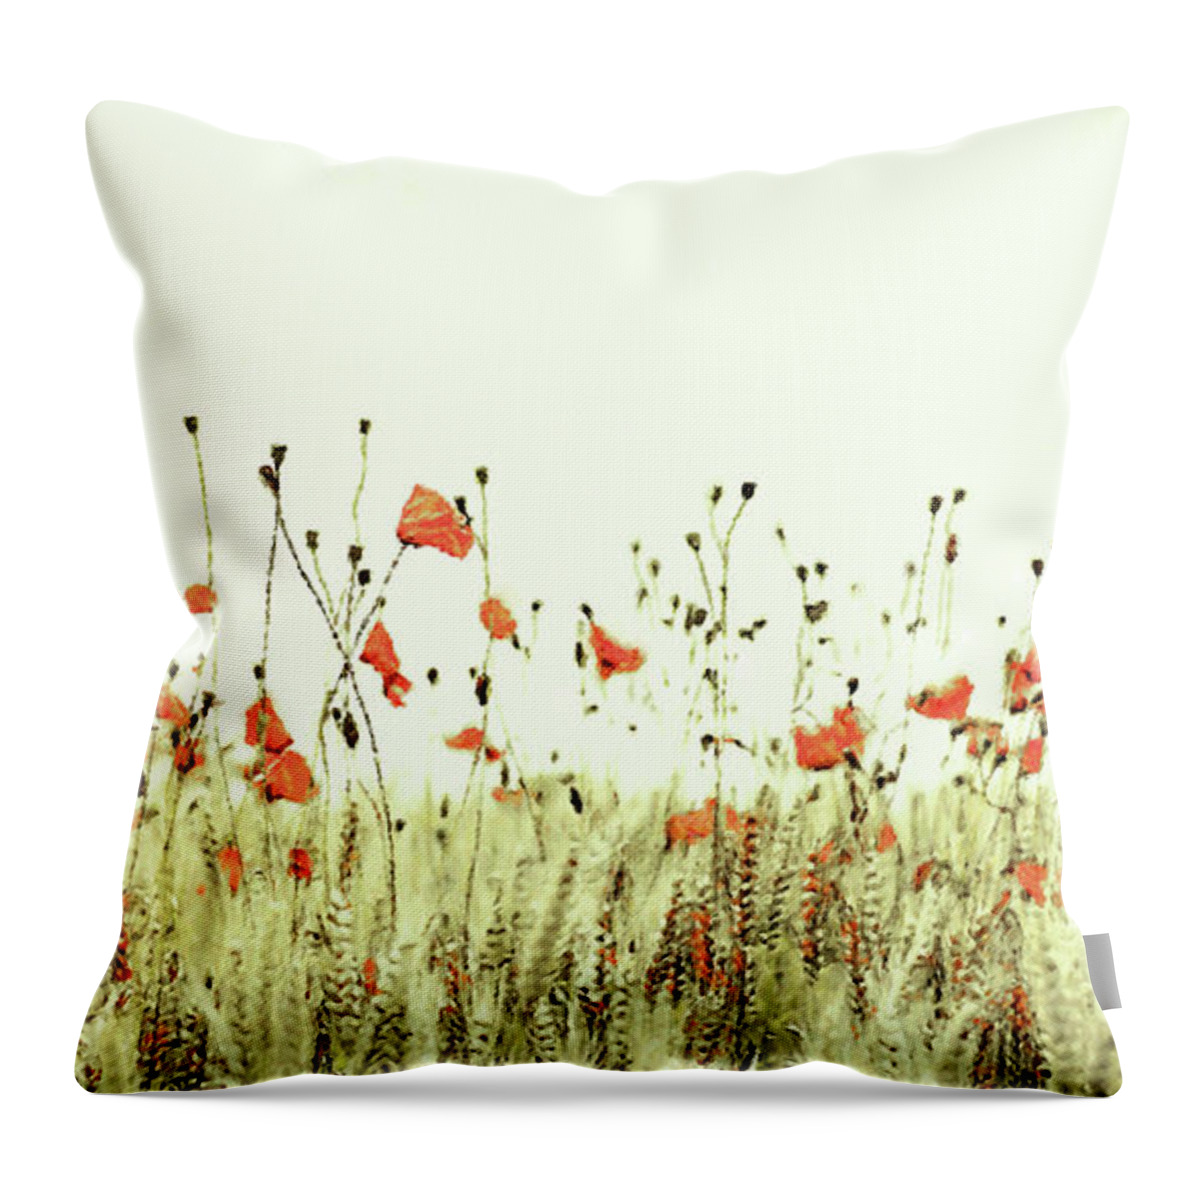 Field Of Coral Poppies Throw Pillow featuring the digital art Field of Coral Poppies by Susan Maxwell Schmidt